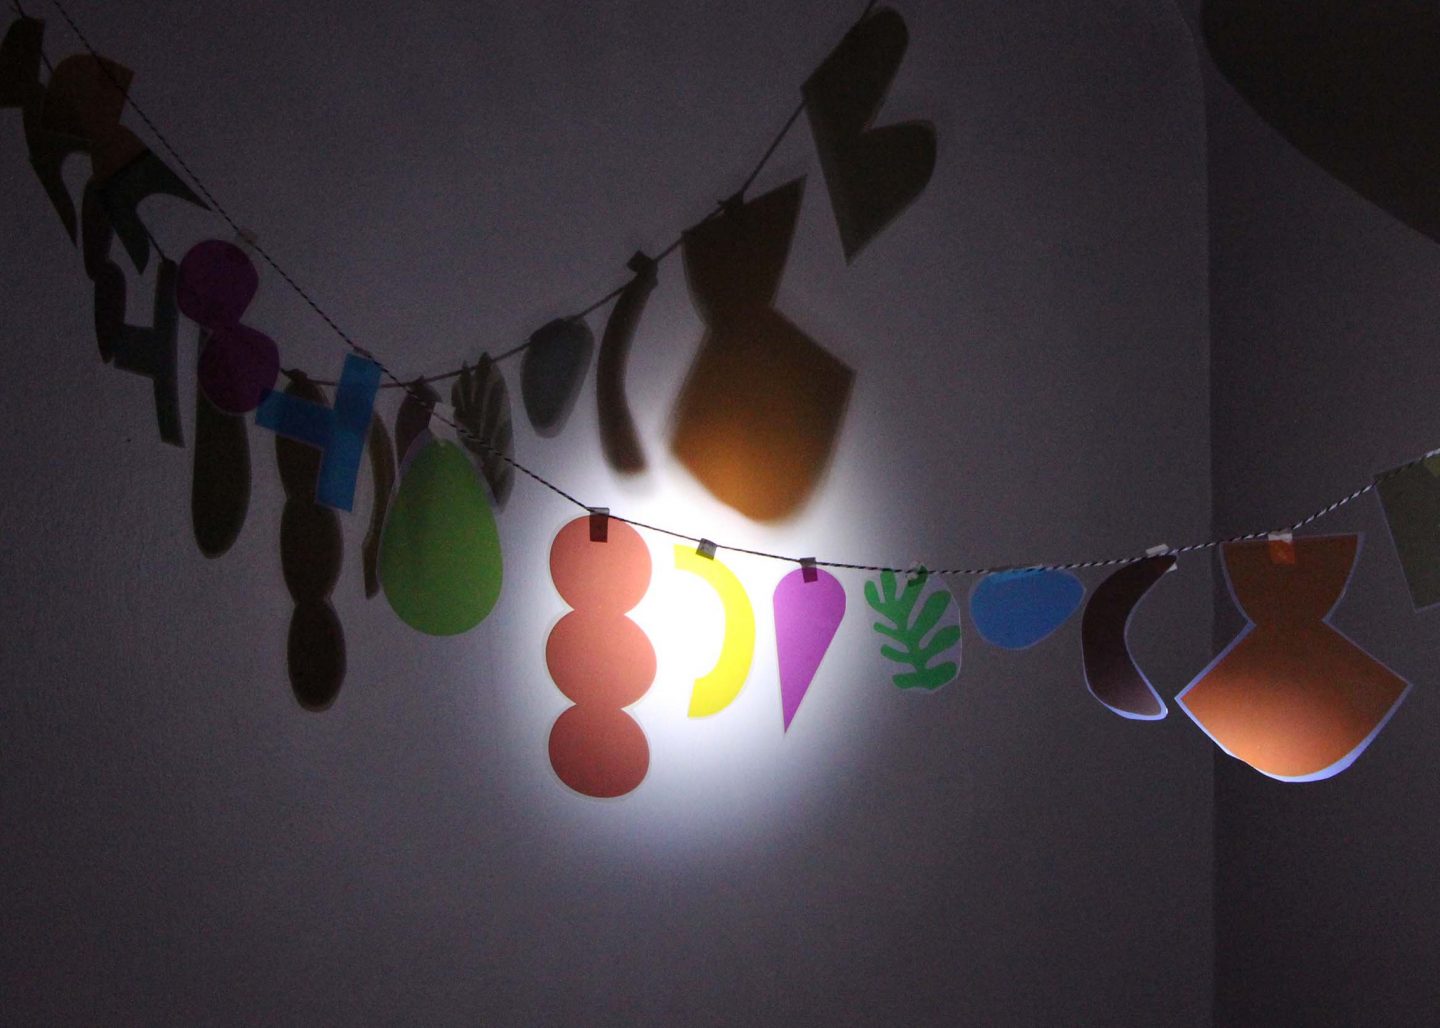 Exploring light and shadow with Play Shapes